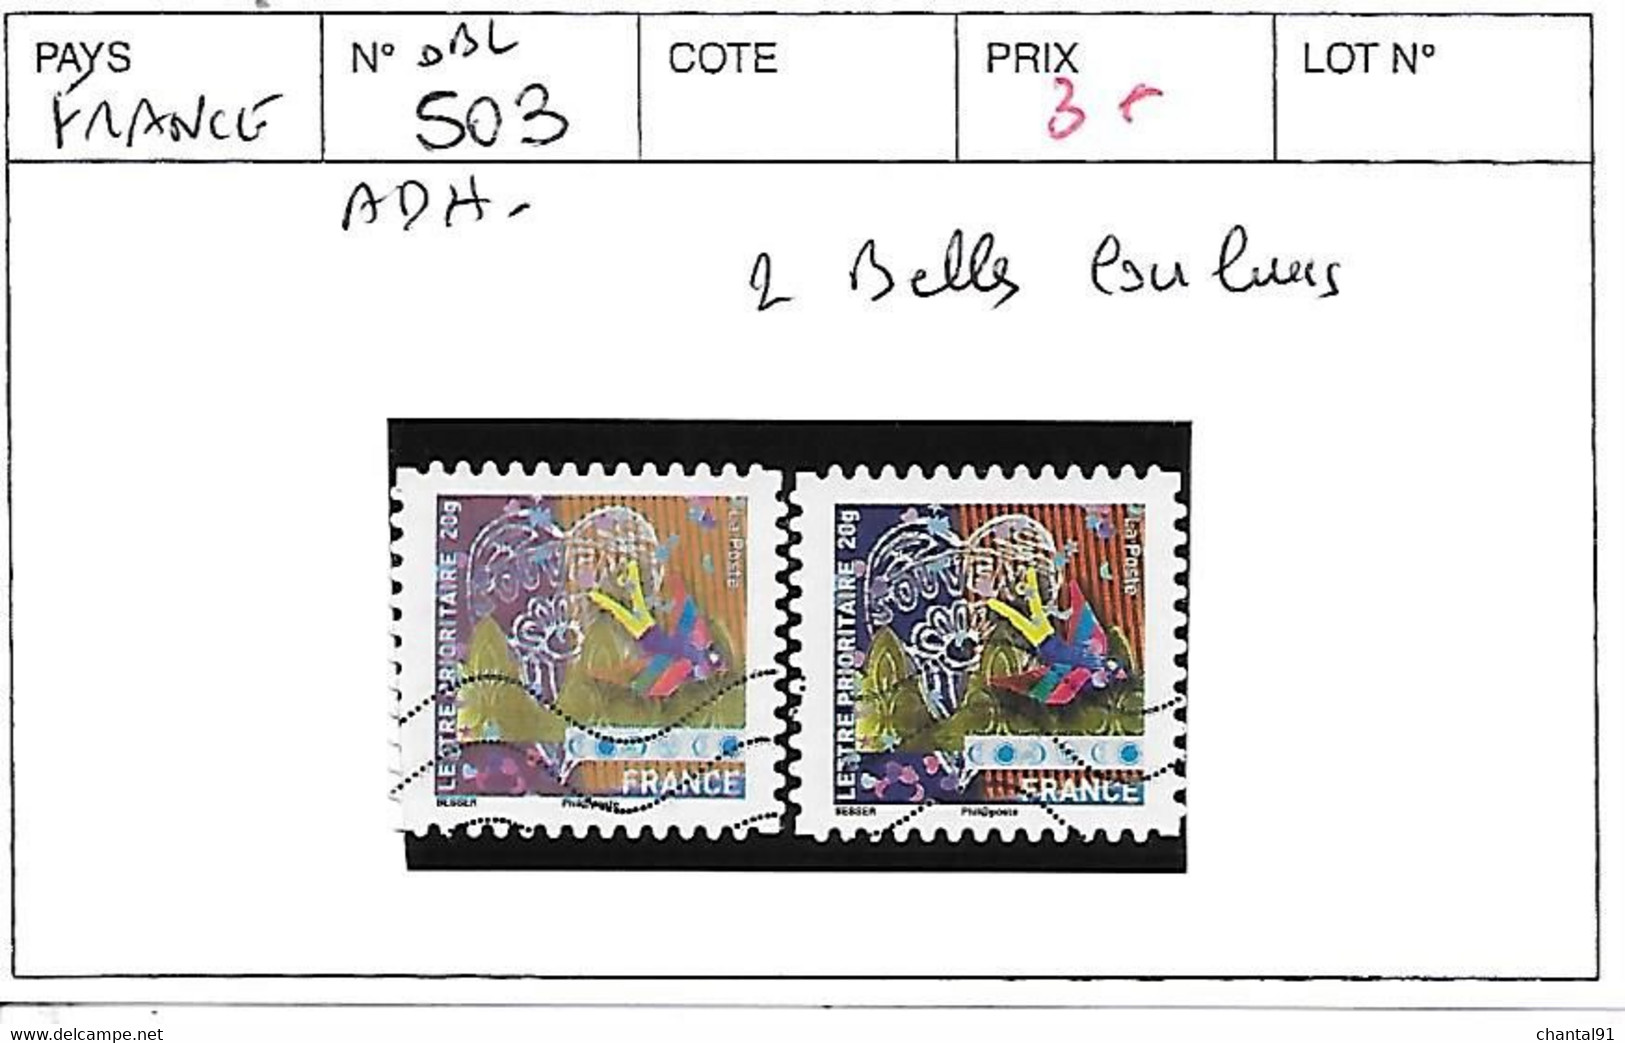 FRANCE ADHESIFS N° 503 OBL 2 BELLES COULEURS - Used Stamps